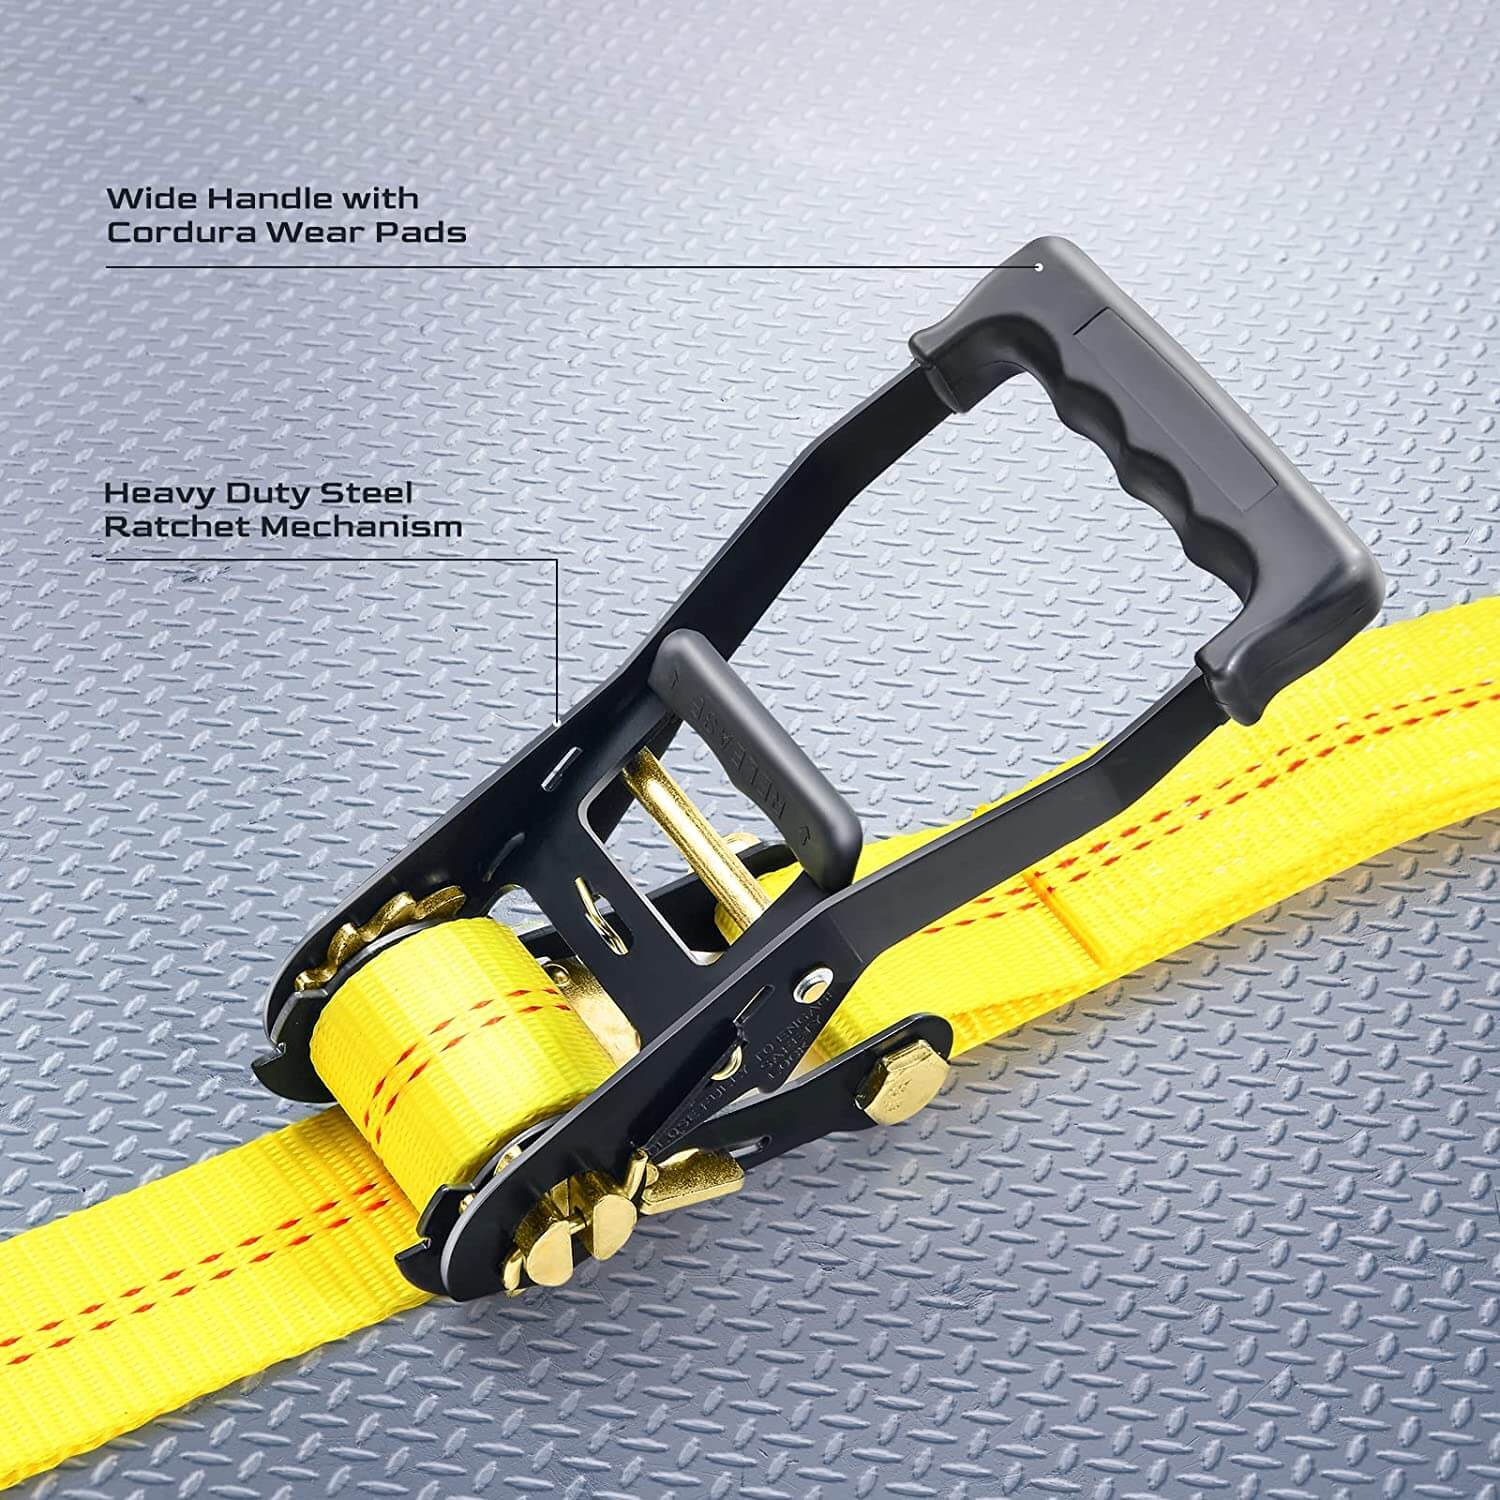 Trekassy Car Tie Down Straps for Trailers with J Hooks